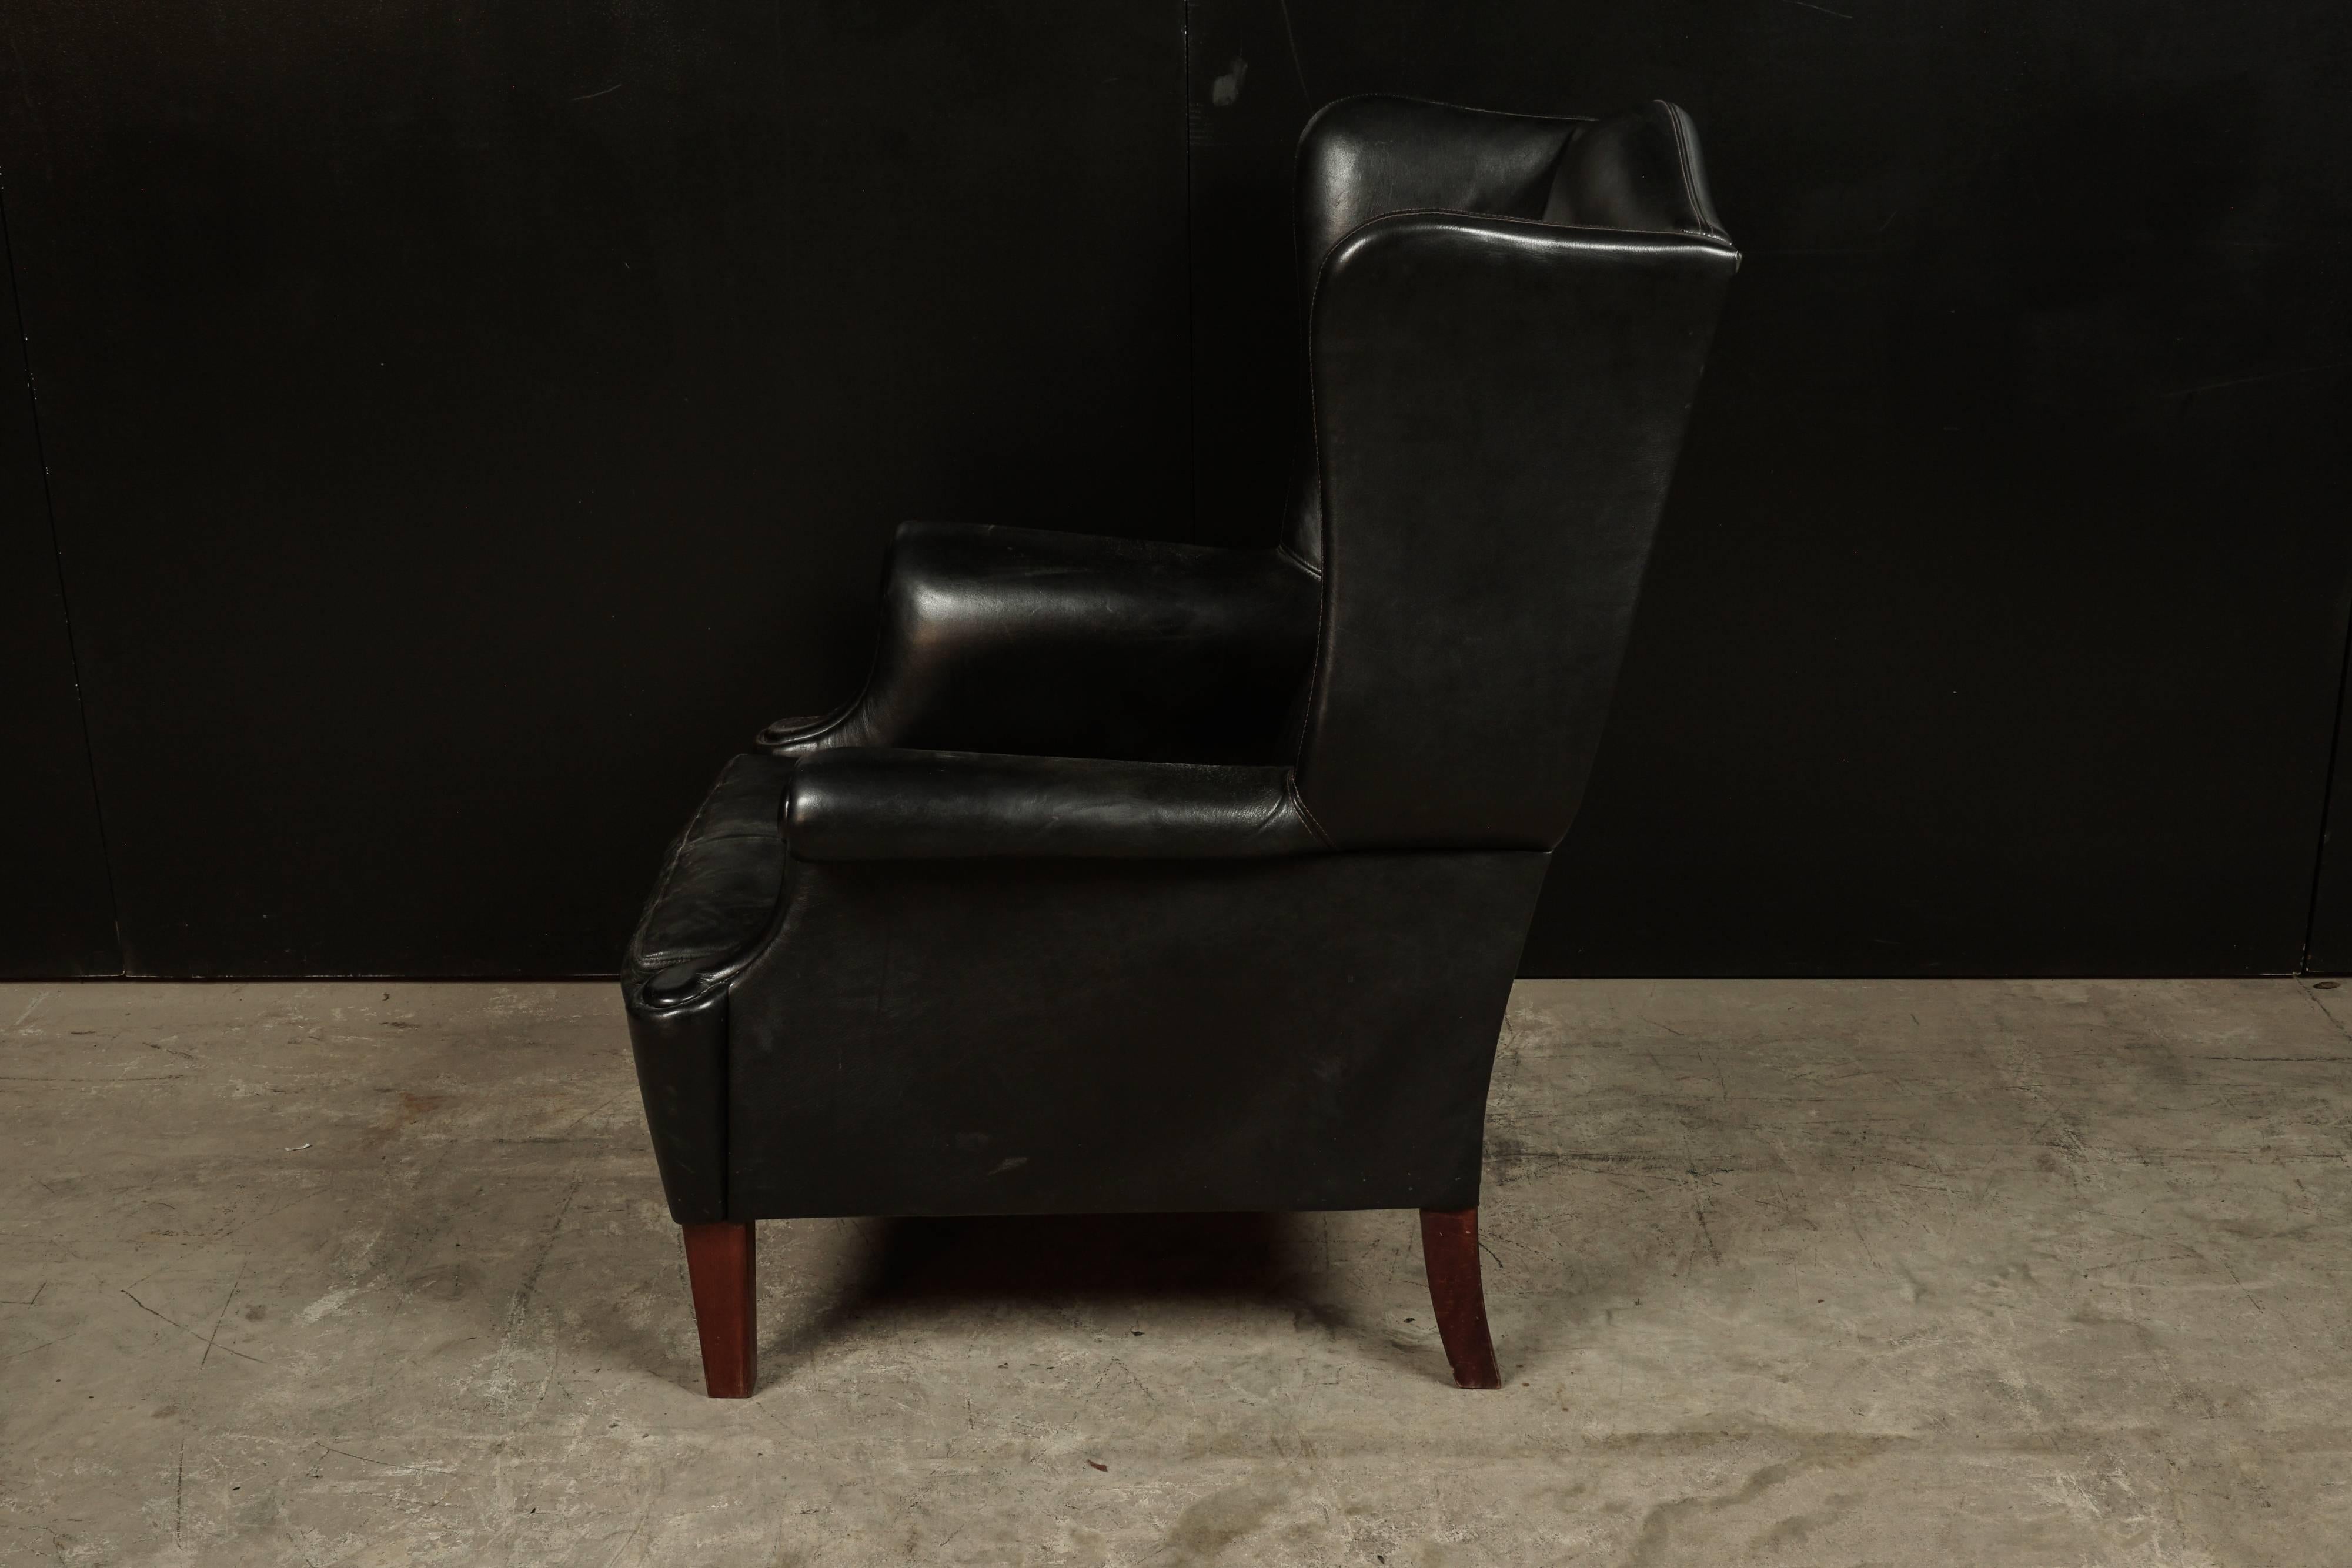 Mid-20th Century Black Leather Wingback Chair from Denmark, circa 1960